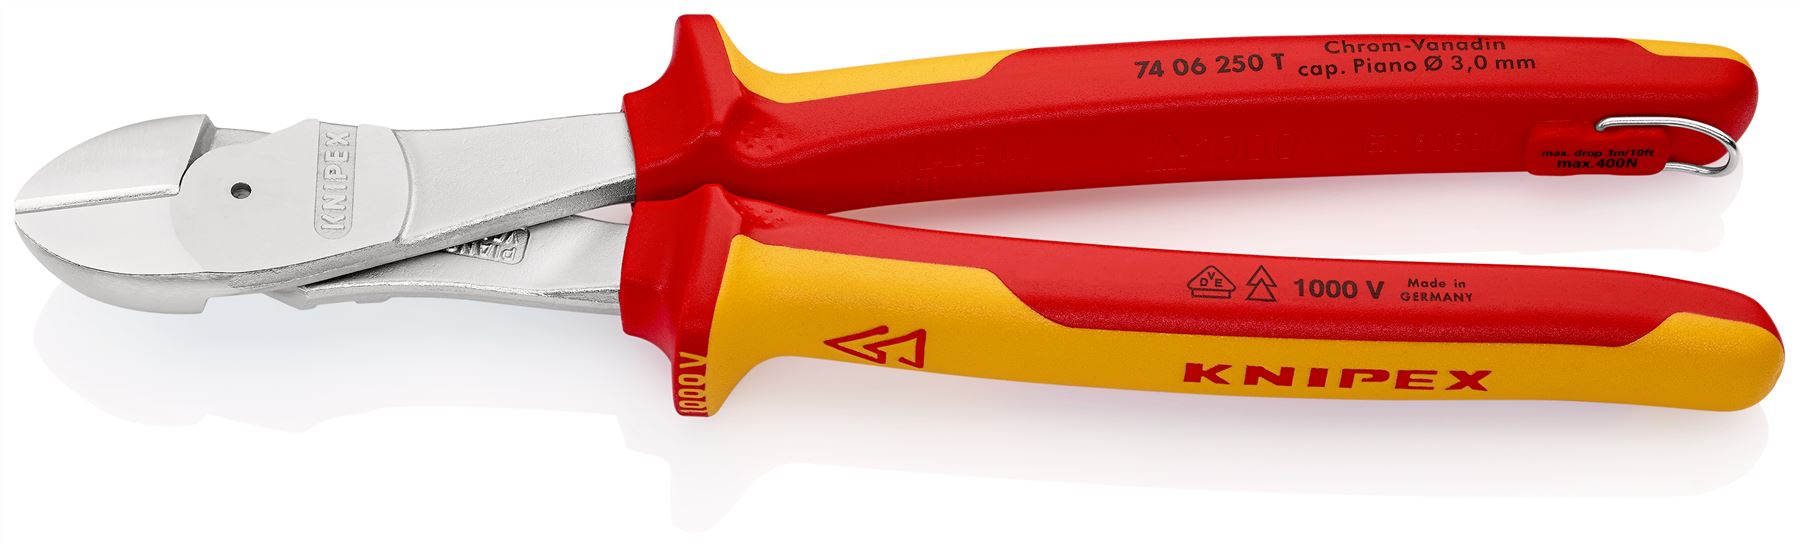 Knipex High Leverage Diagonal Cutter 250mm VDE Insulated 1000V with Tether Point 74 06 250 T